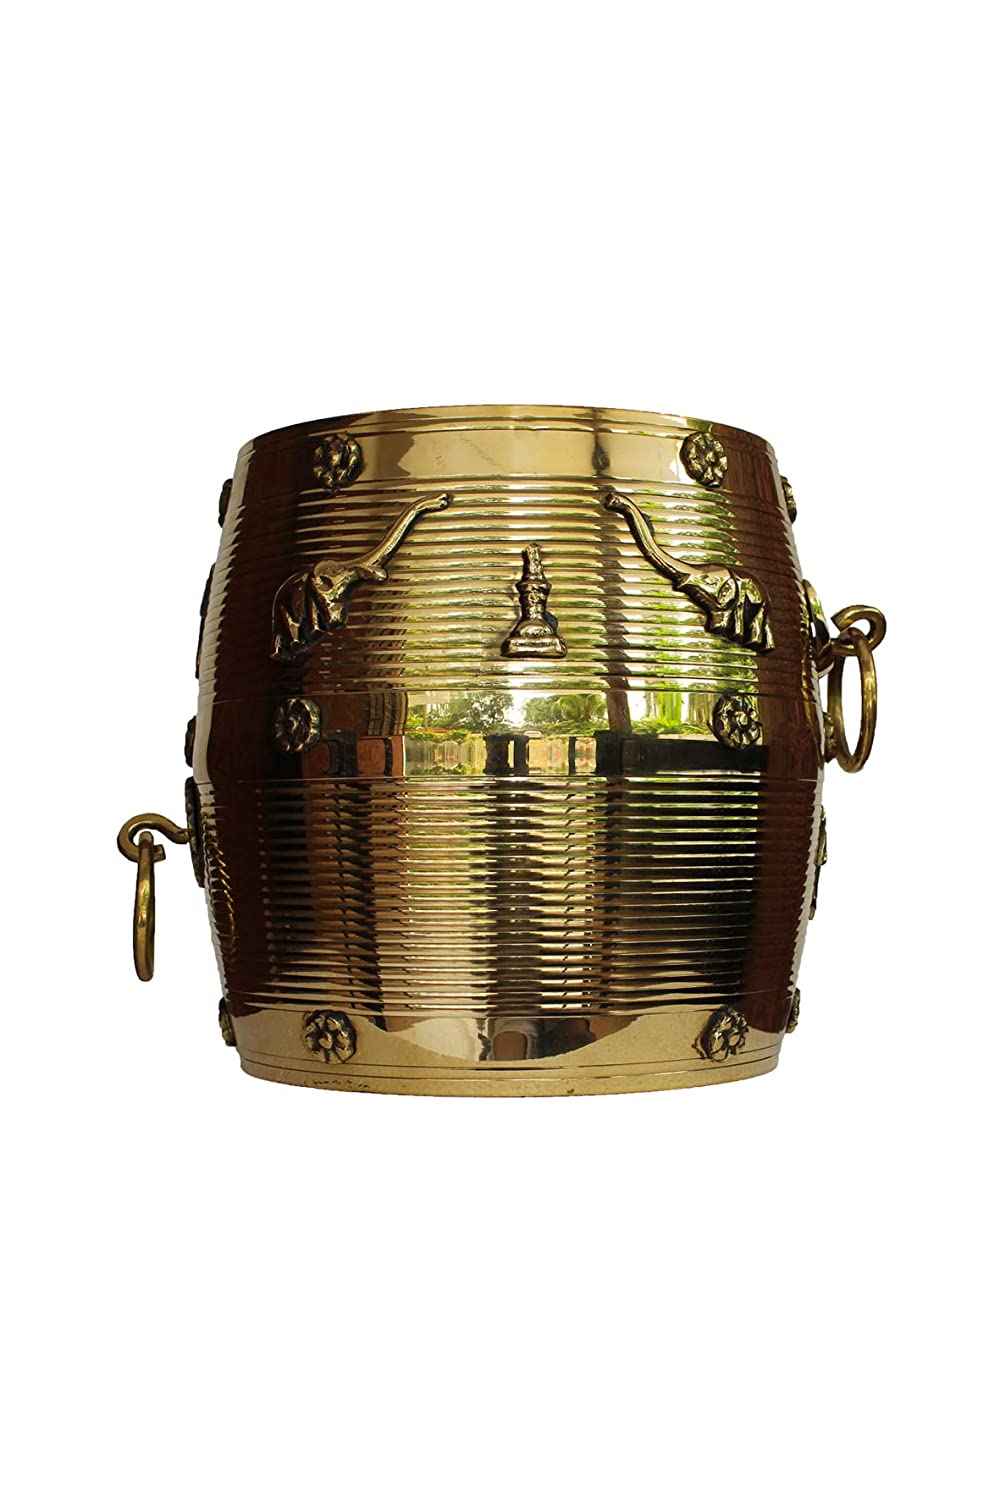 Buy MDT India Brass Decorated Wooden Nirapara Traditional Kerala Farmers  Measuring Vessel Antique Handicraft (Brown, 11 Inch) Online at Low Prices  in India 